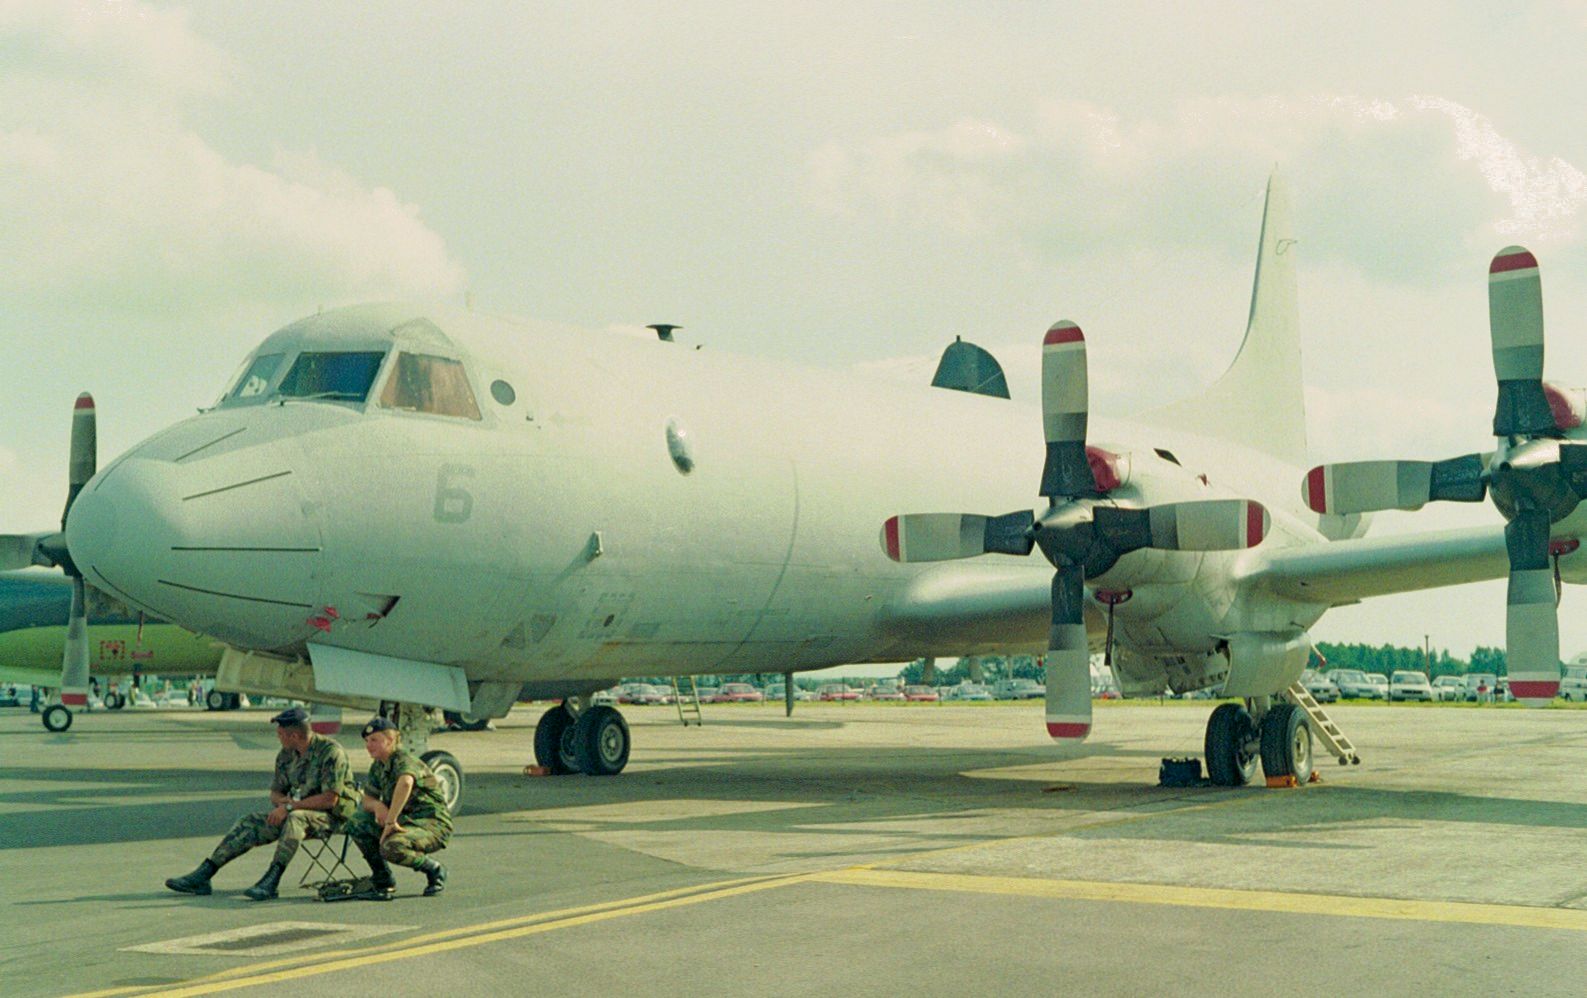 A Lockheed P-3 Orion on an airfield apron.